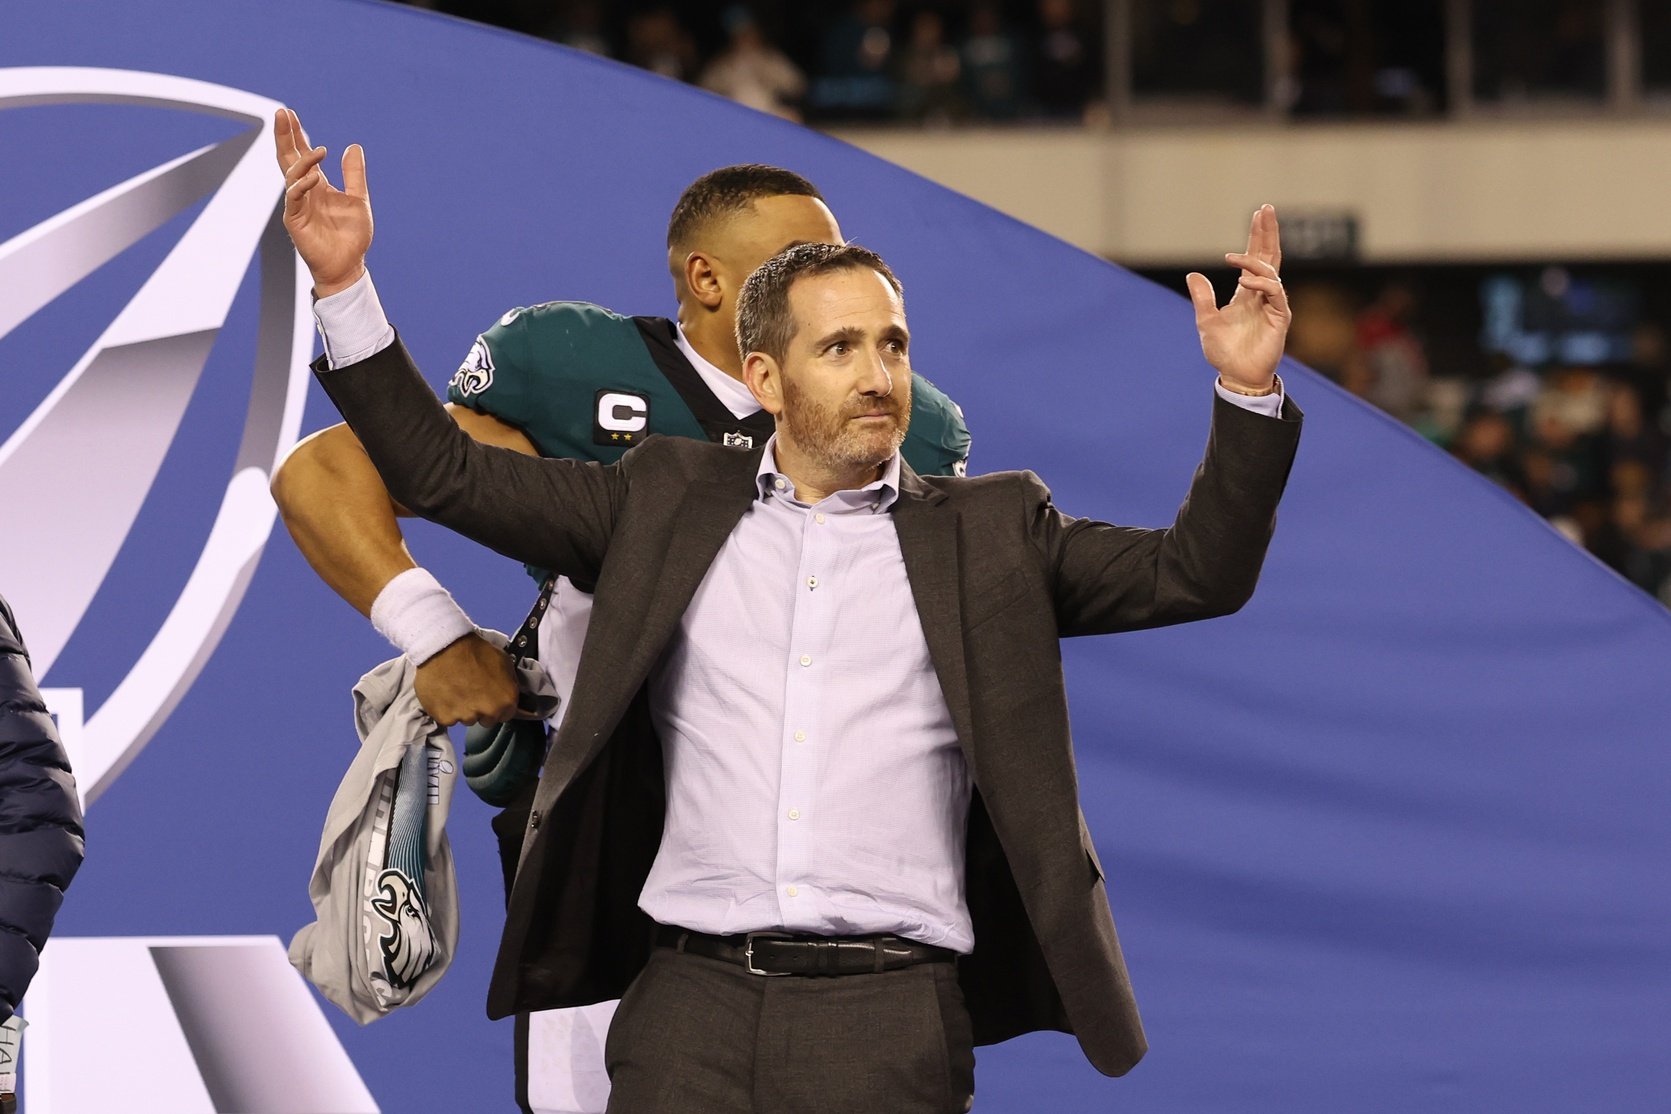 Philadelphia Eagles general manager Howie Roseman after win against the San Francisco 49ers in the NFC Championship game at Lincoln Financial Field.